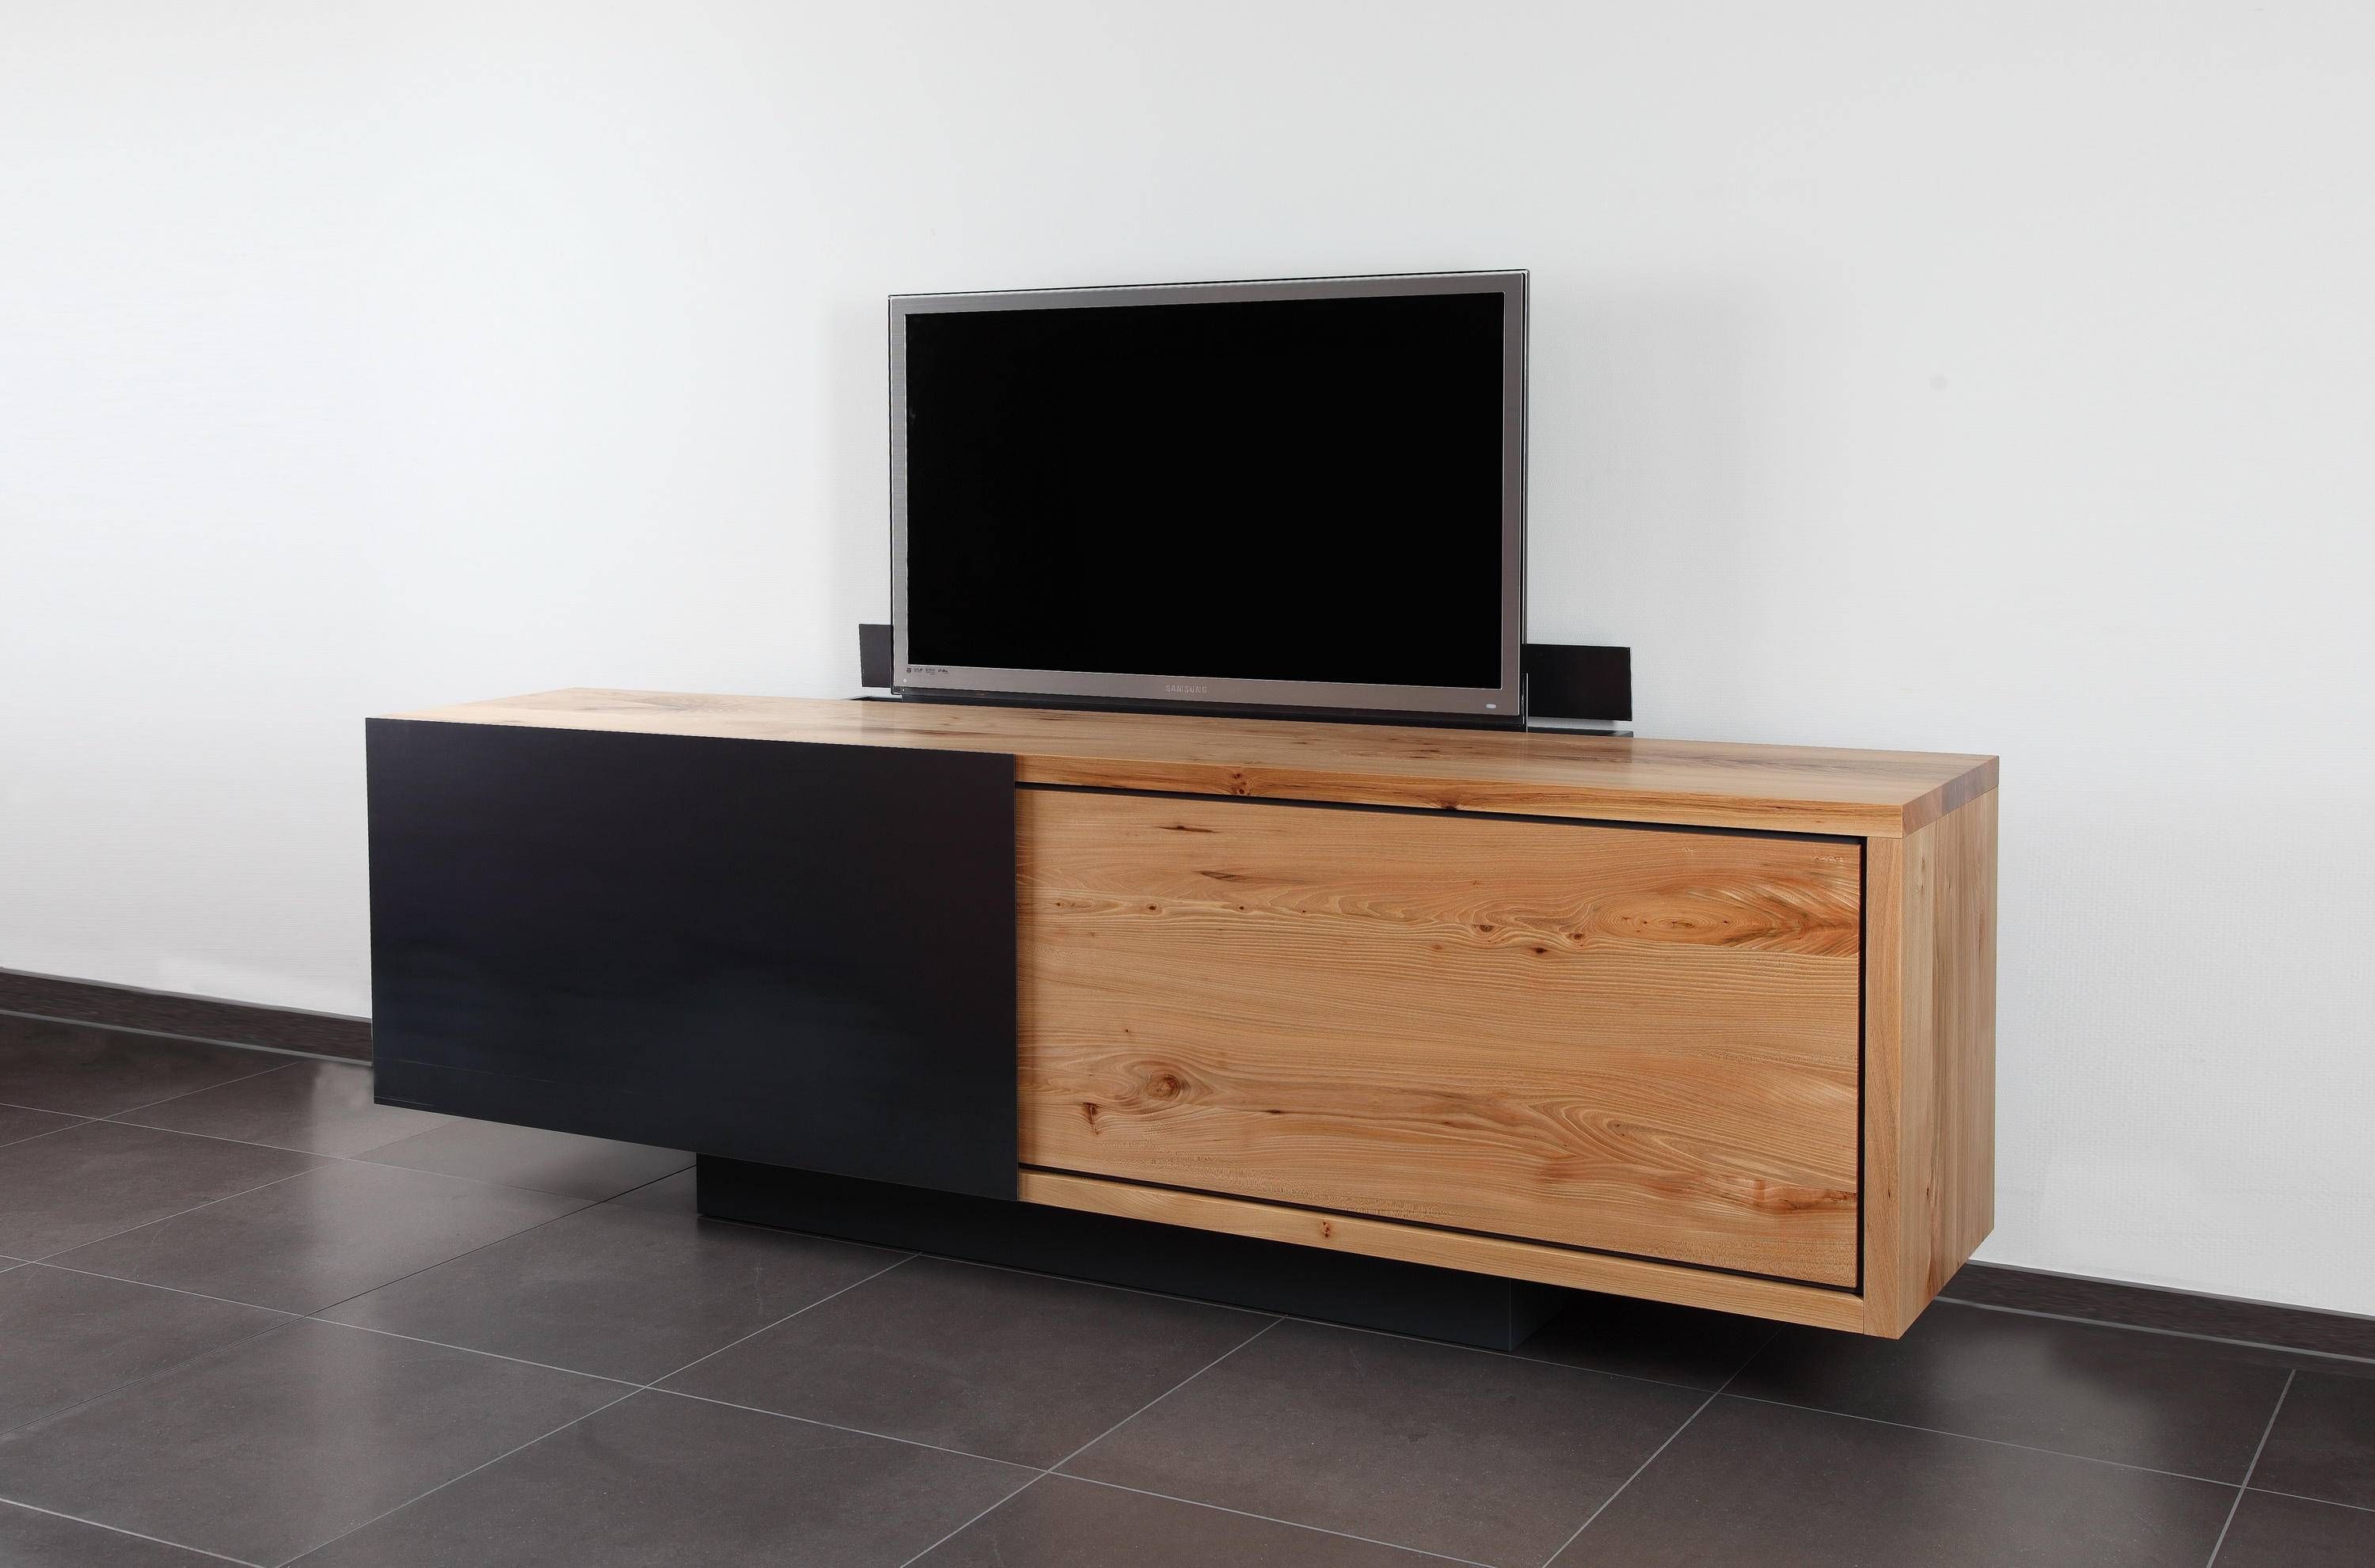 Ign. B2. Tv. Sideboard. – Multimedia Sideboards From Ign (View 1 of 20)